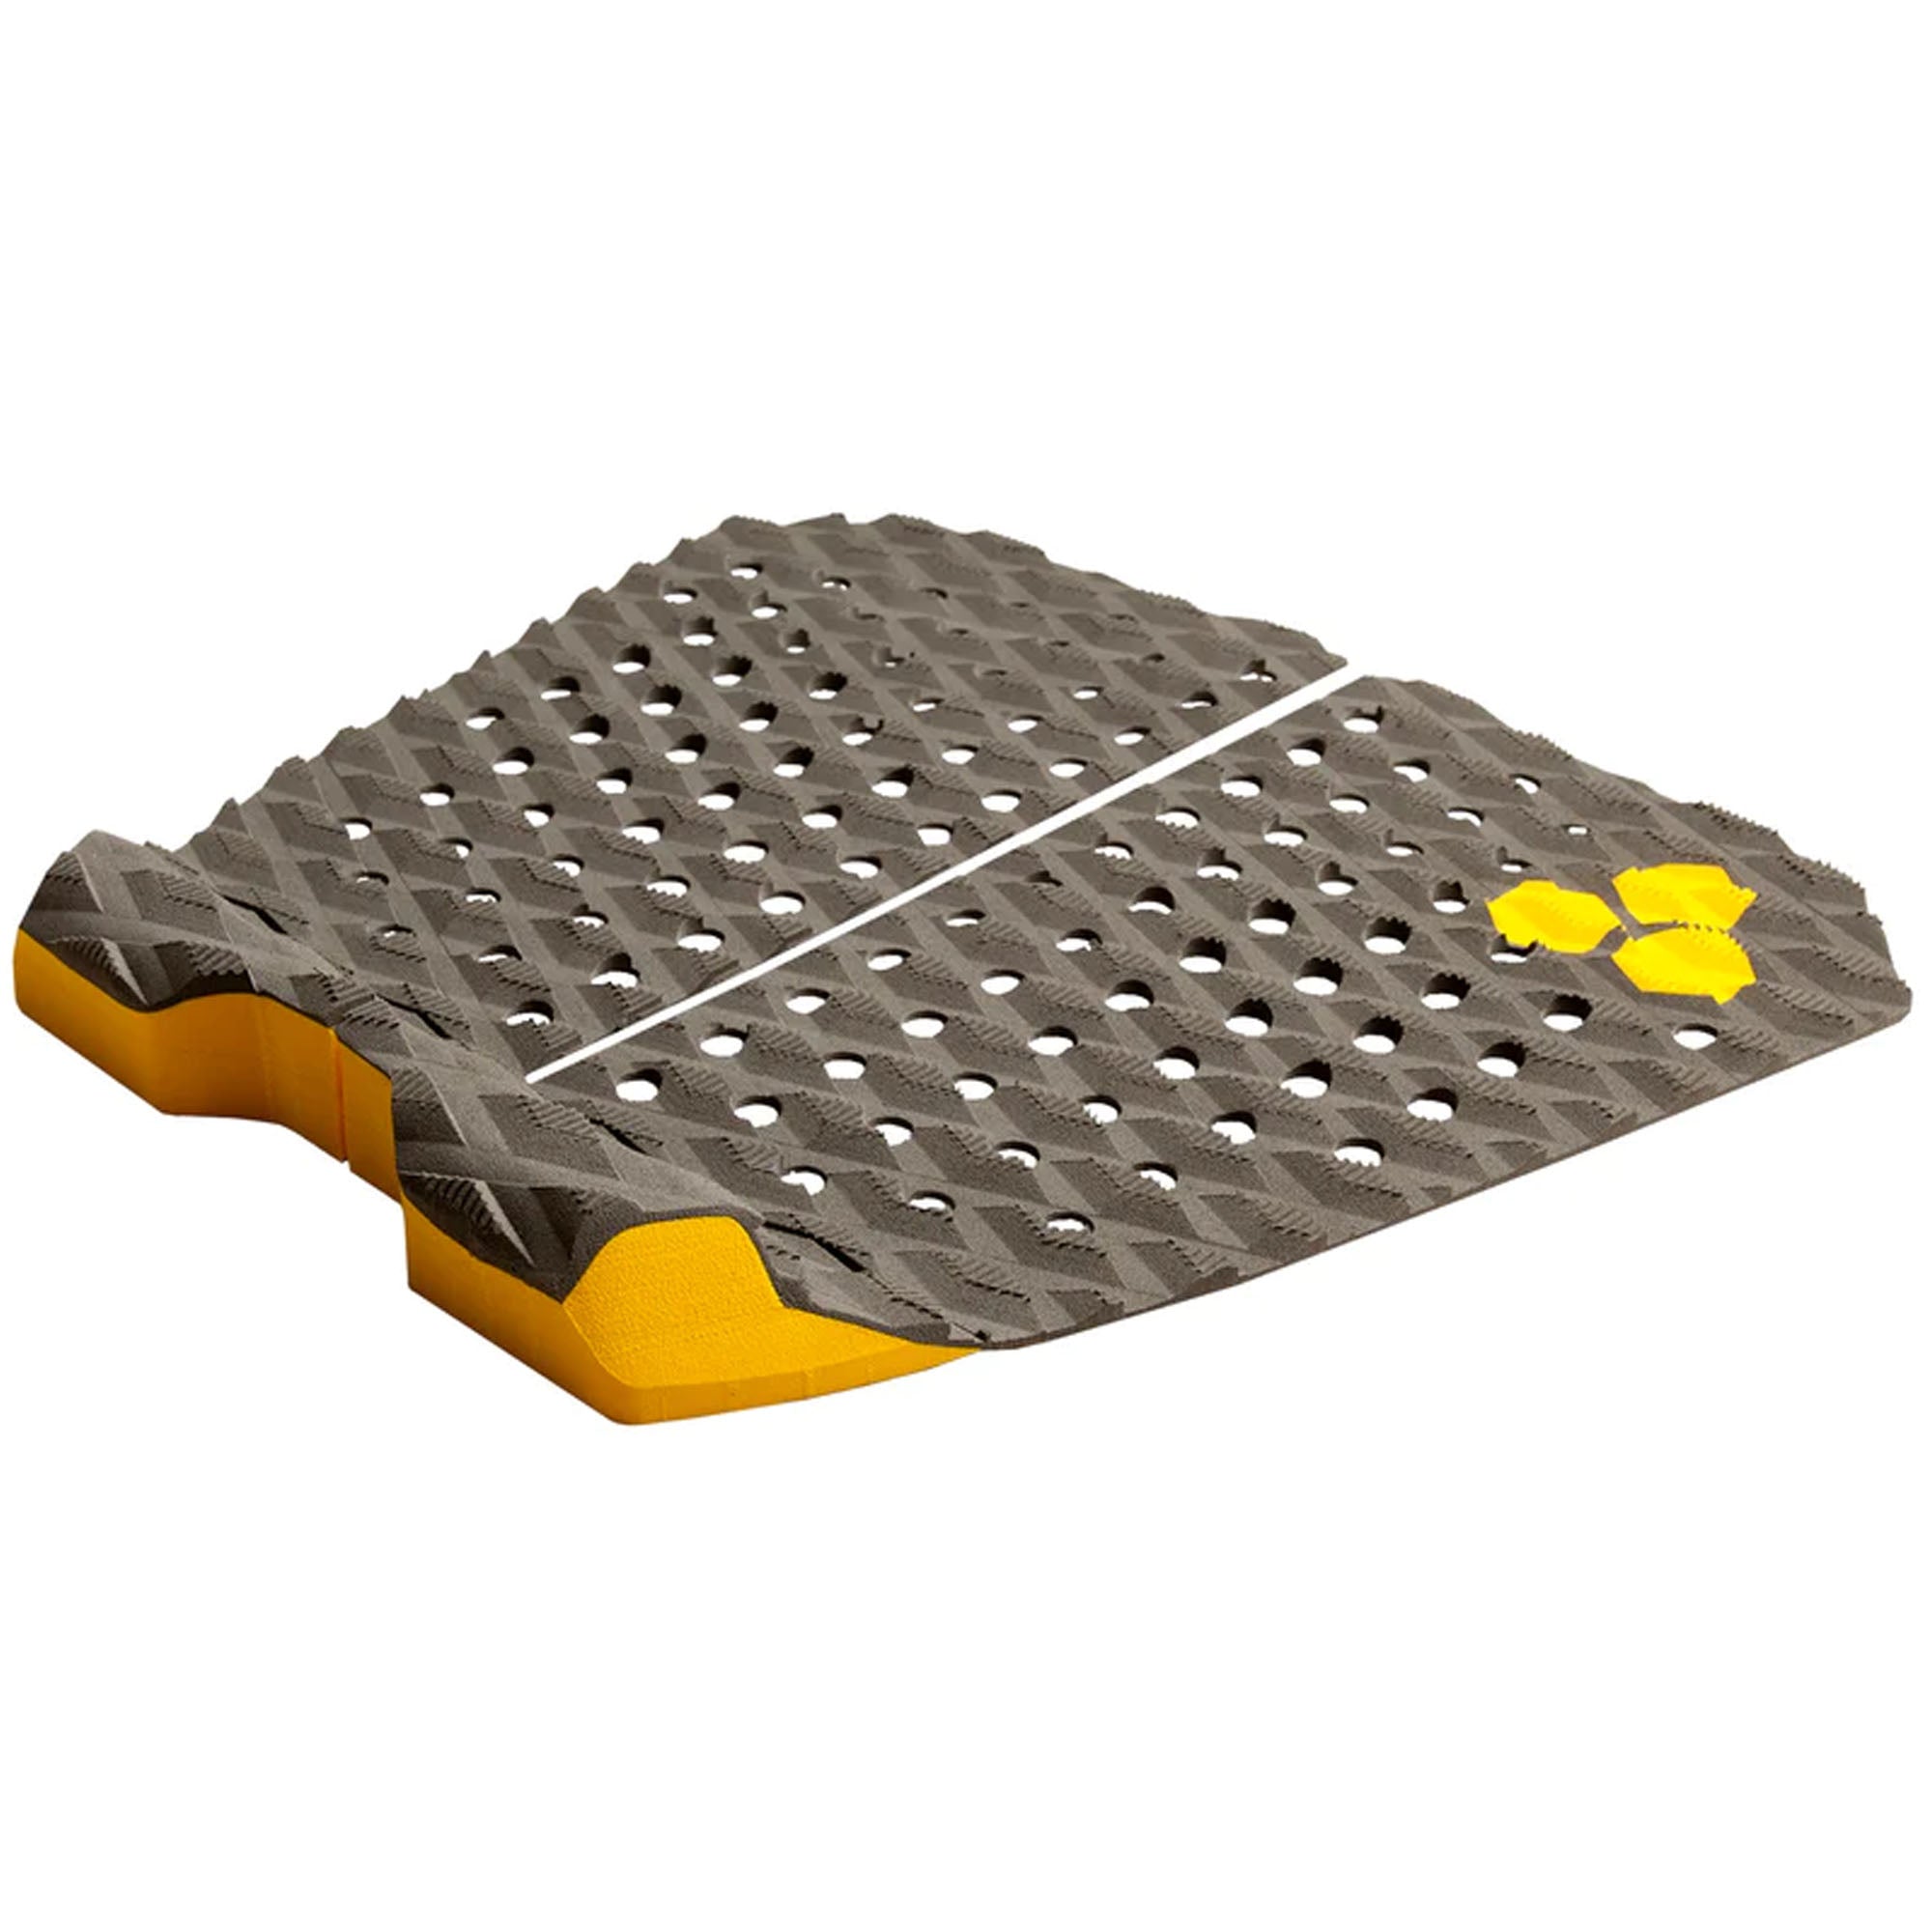 Channel Islands Factor XL Flat Traction Pad